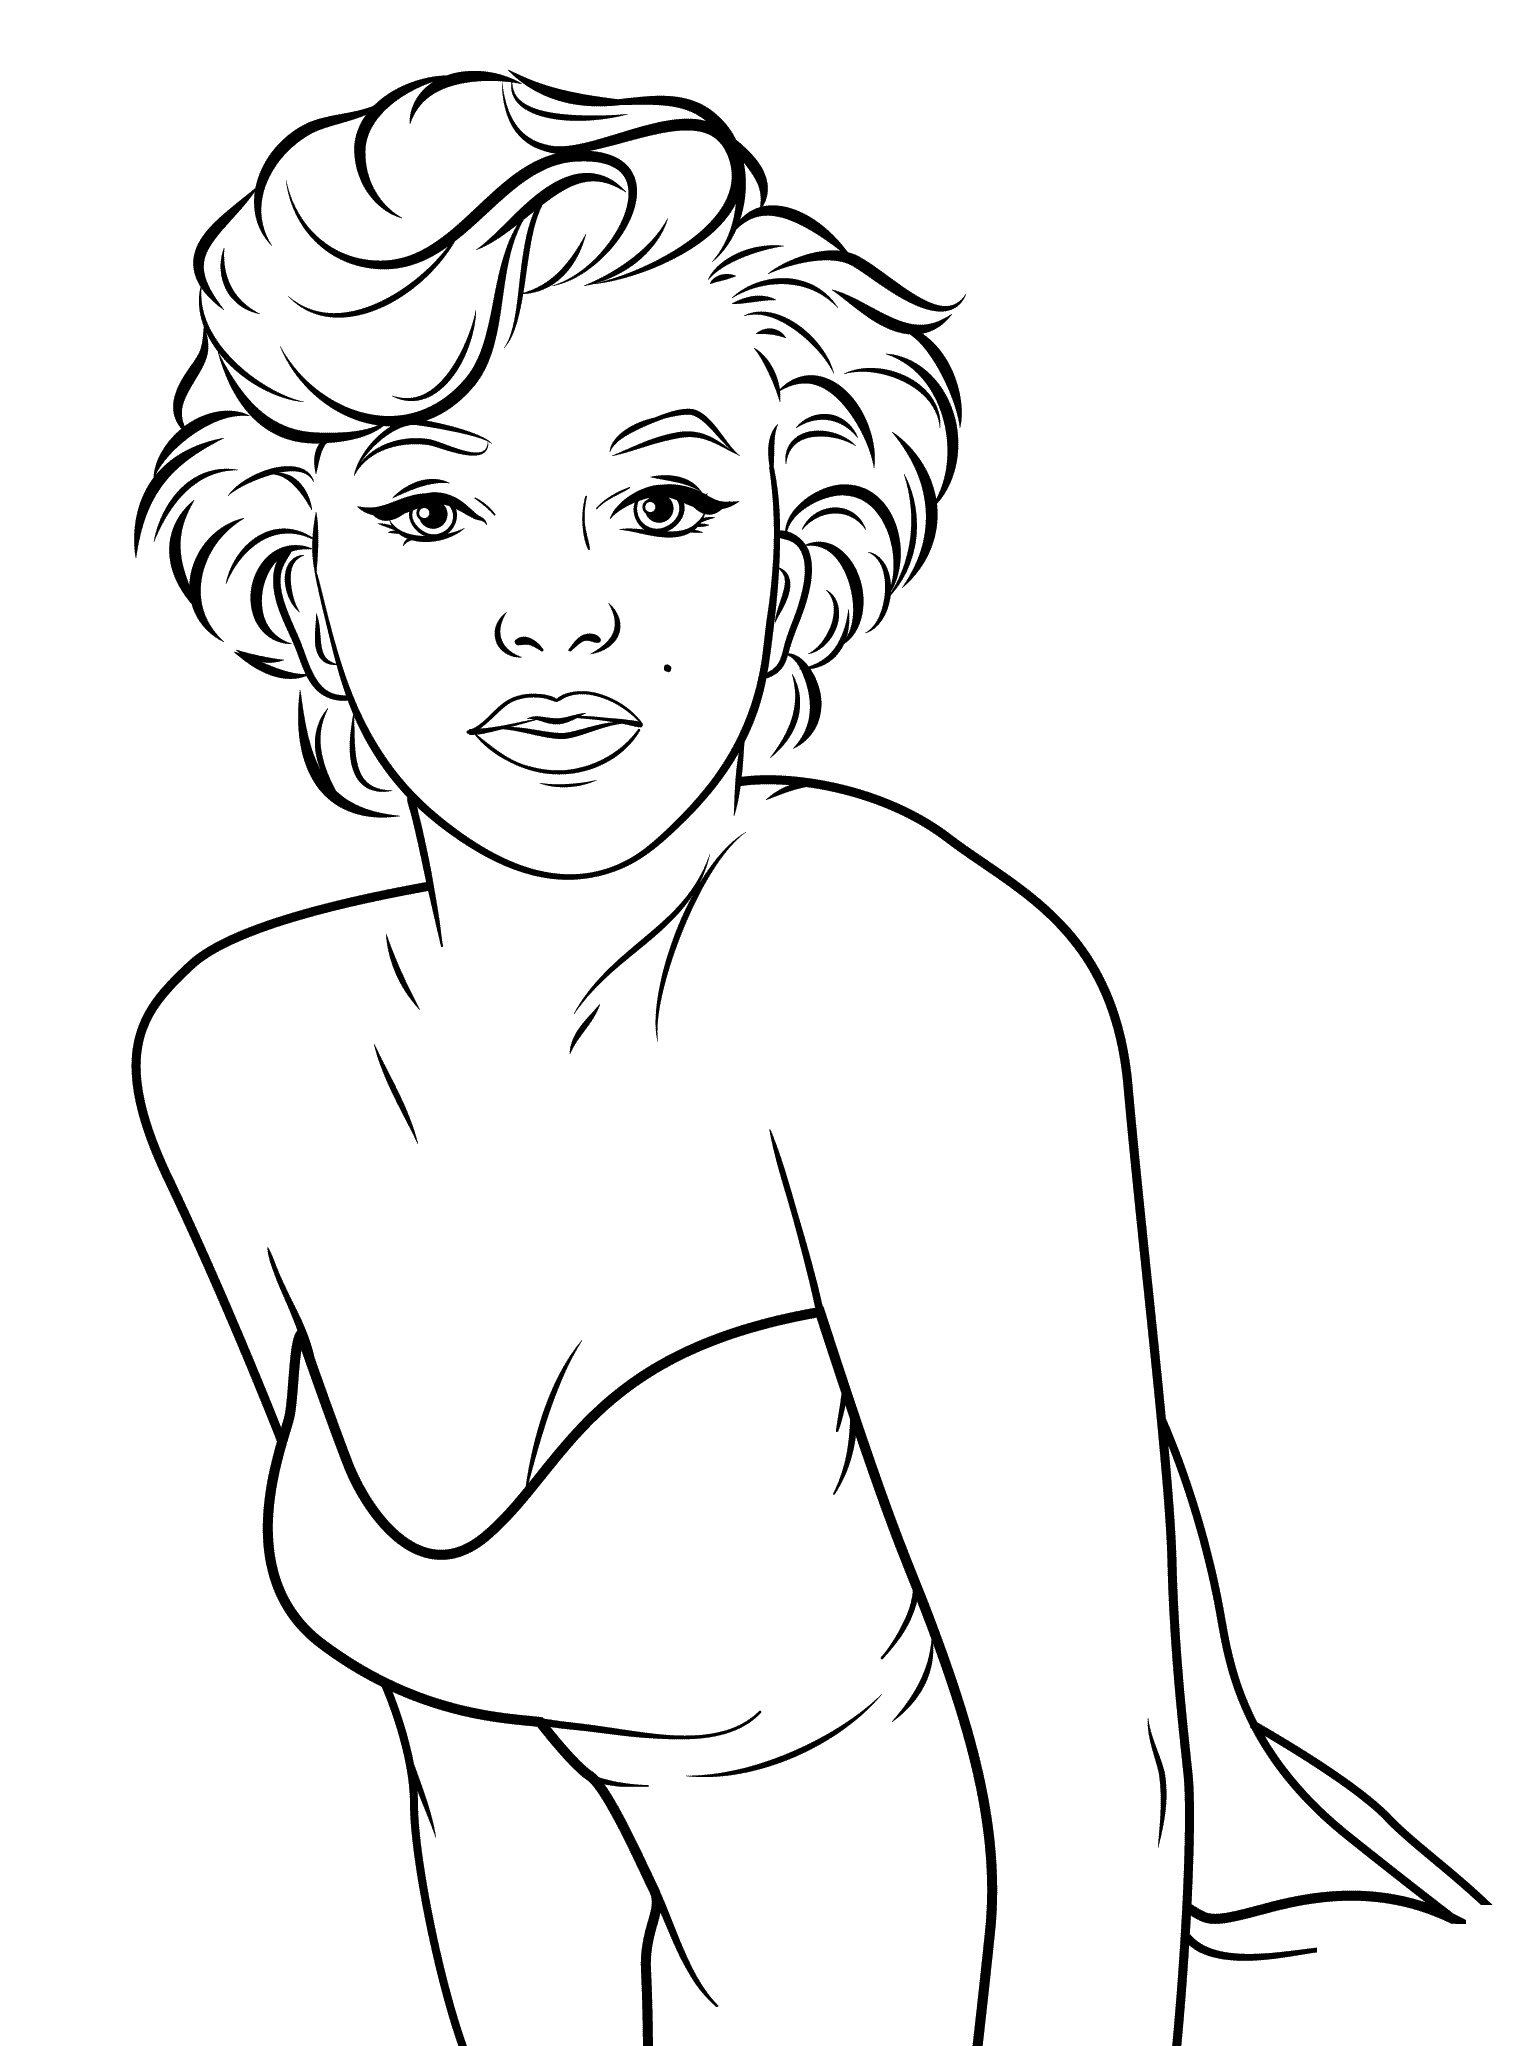 Marilyn Monroe Celebrity 2 Coloring Page